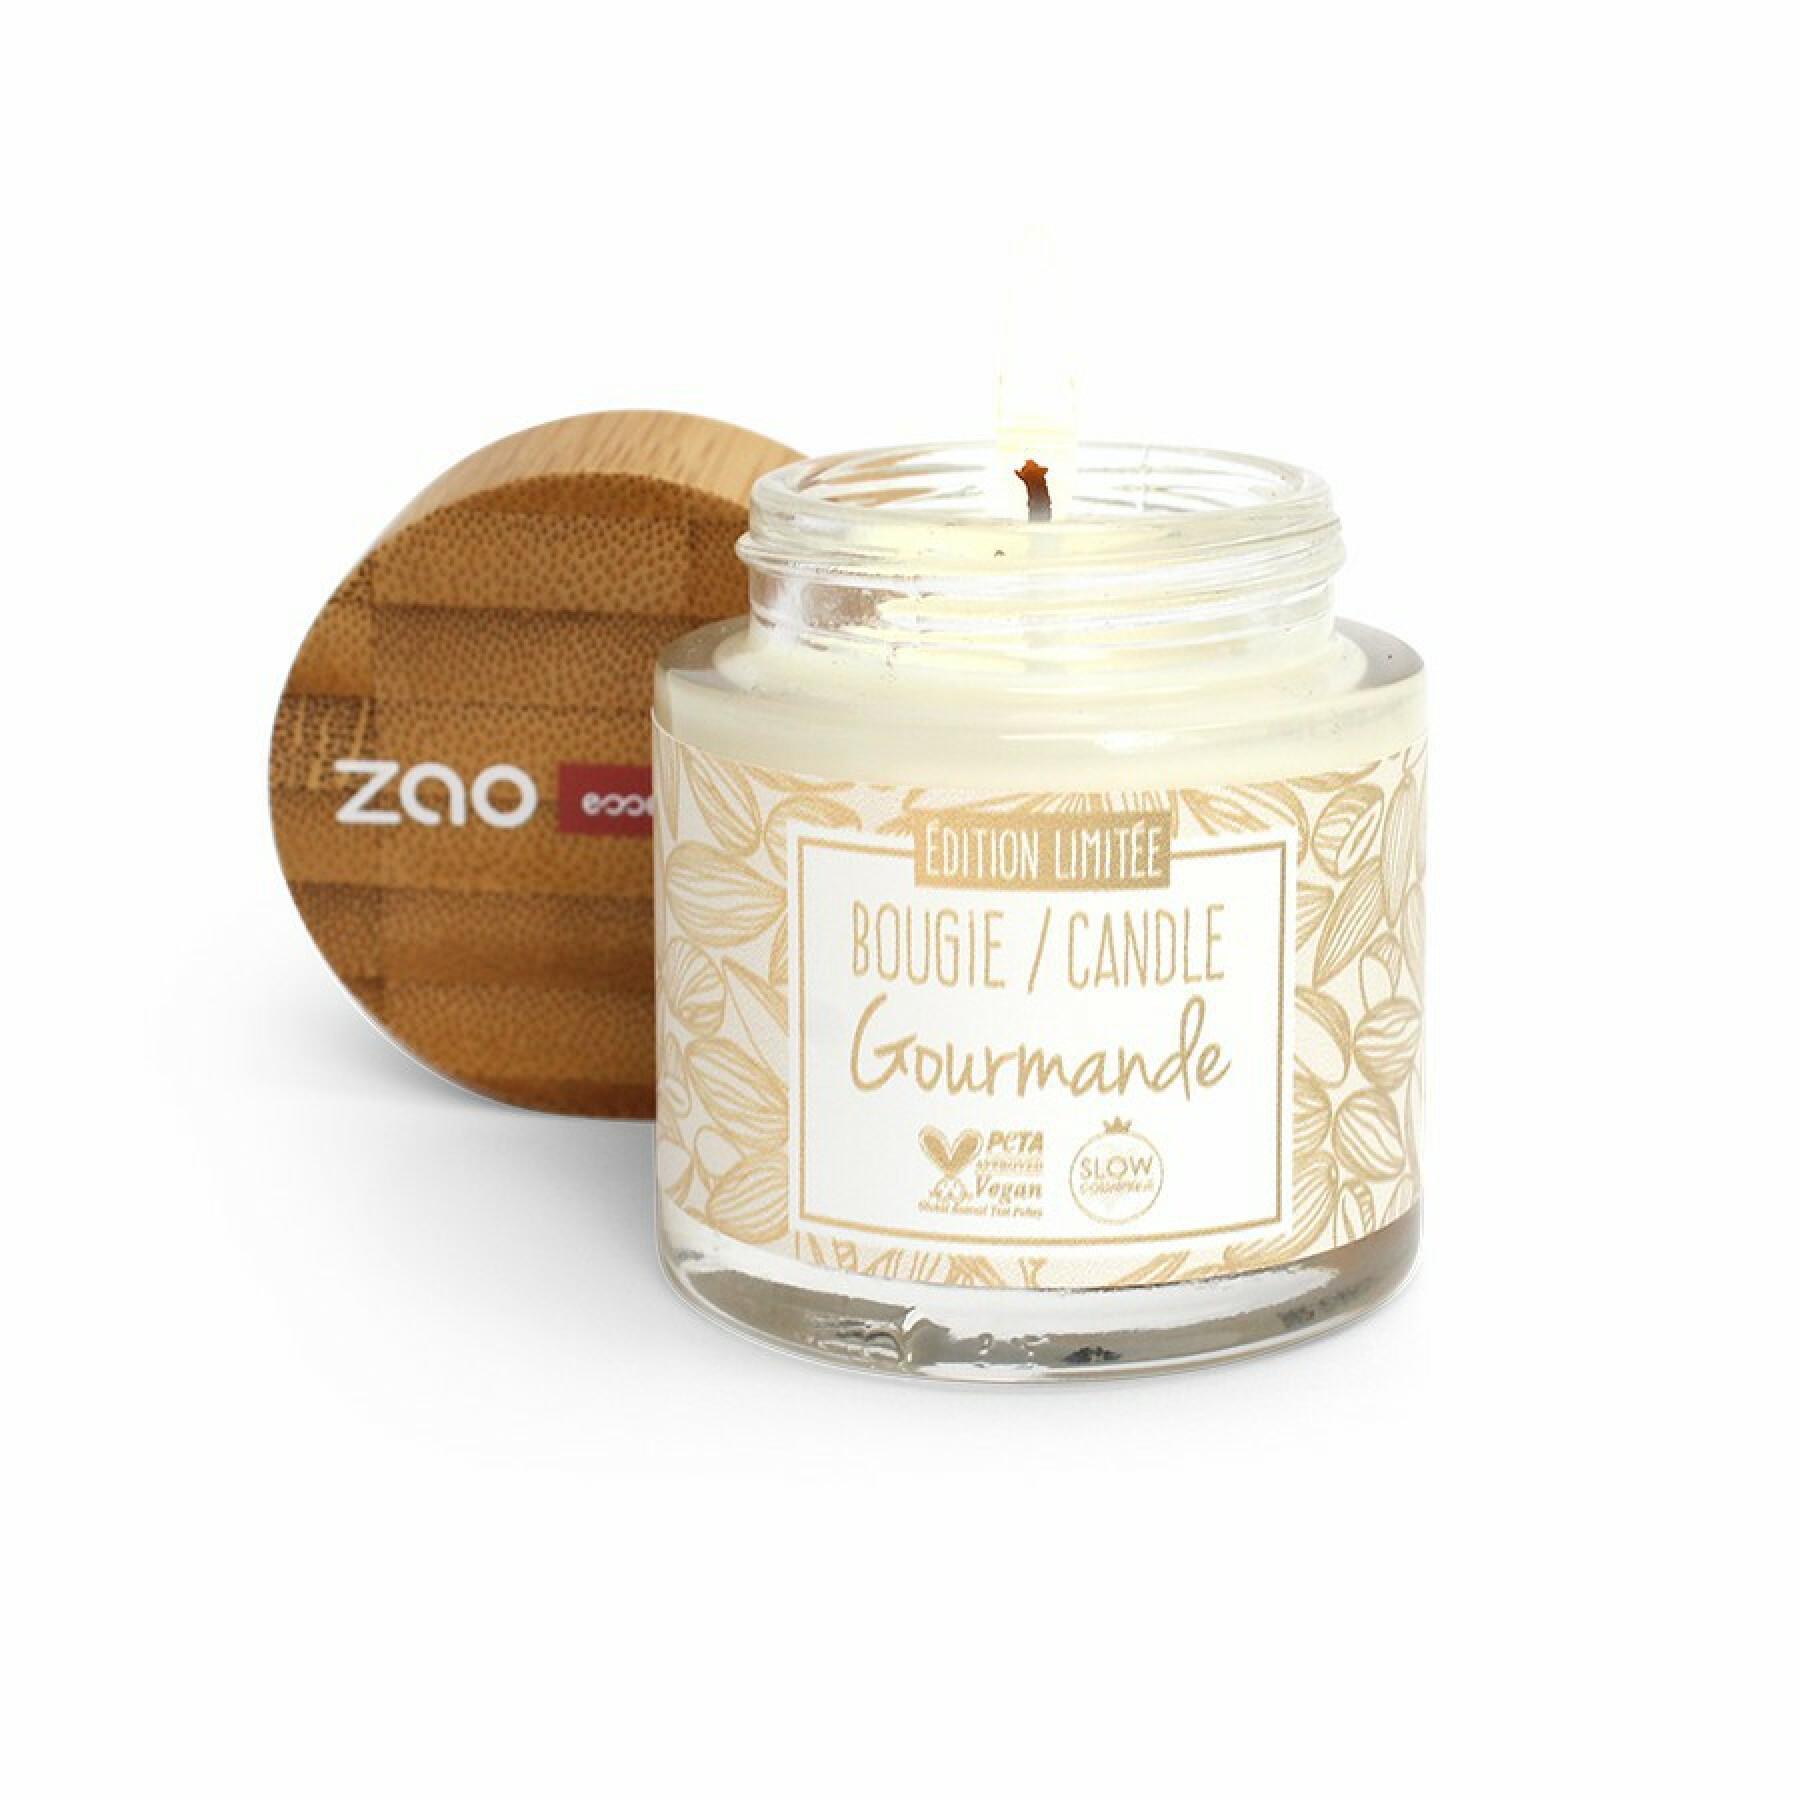 100% vegetable wax candles for women Zao